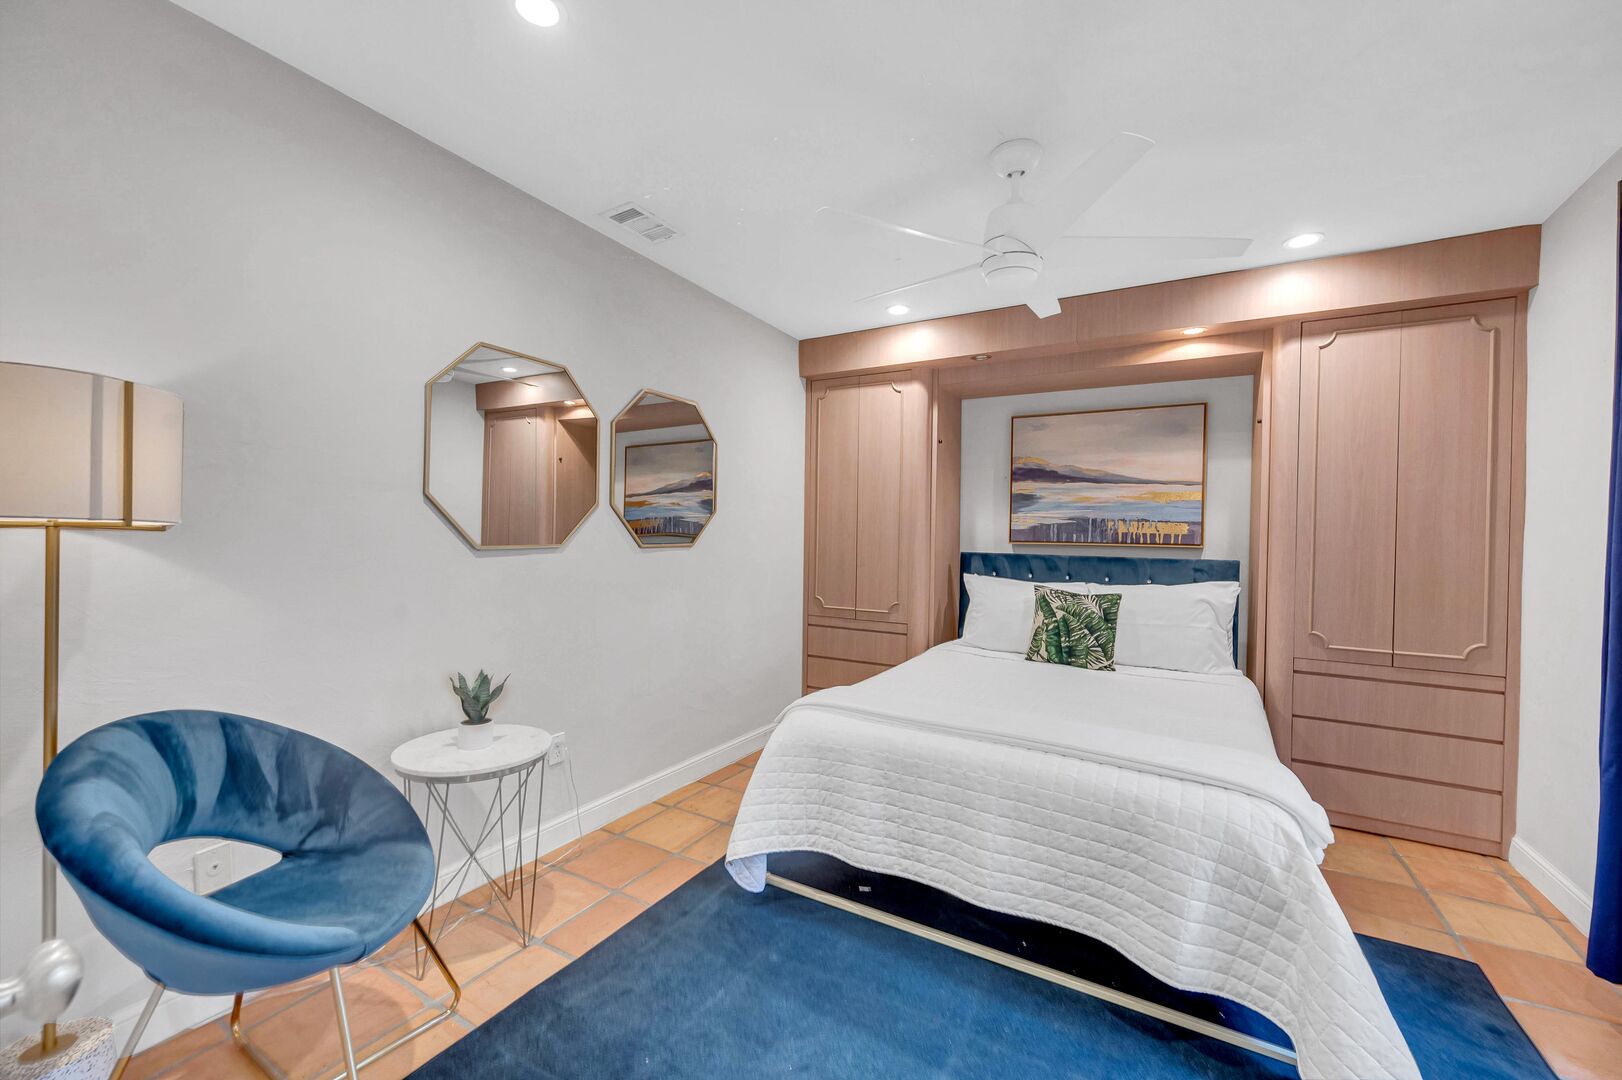 The third bedroom features a queen size bed and a separate patio.